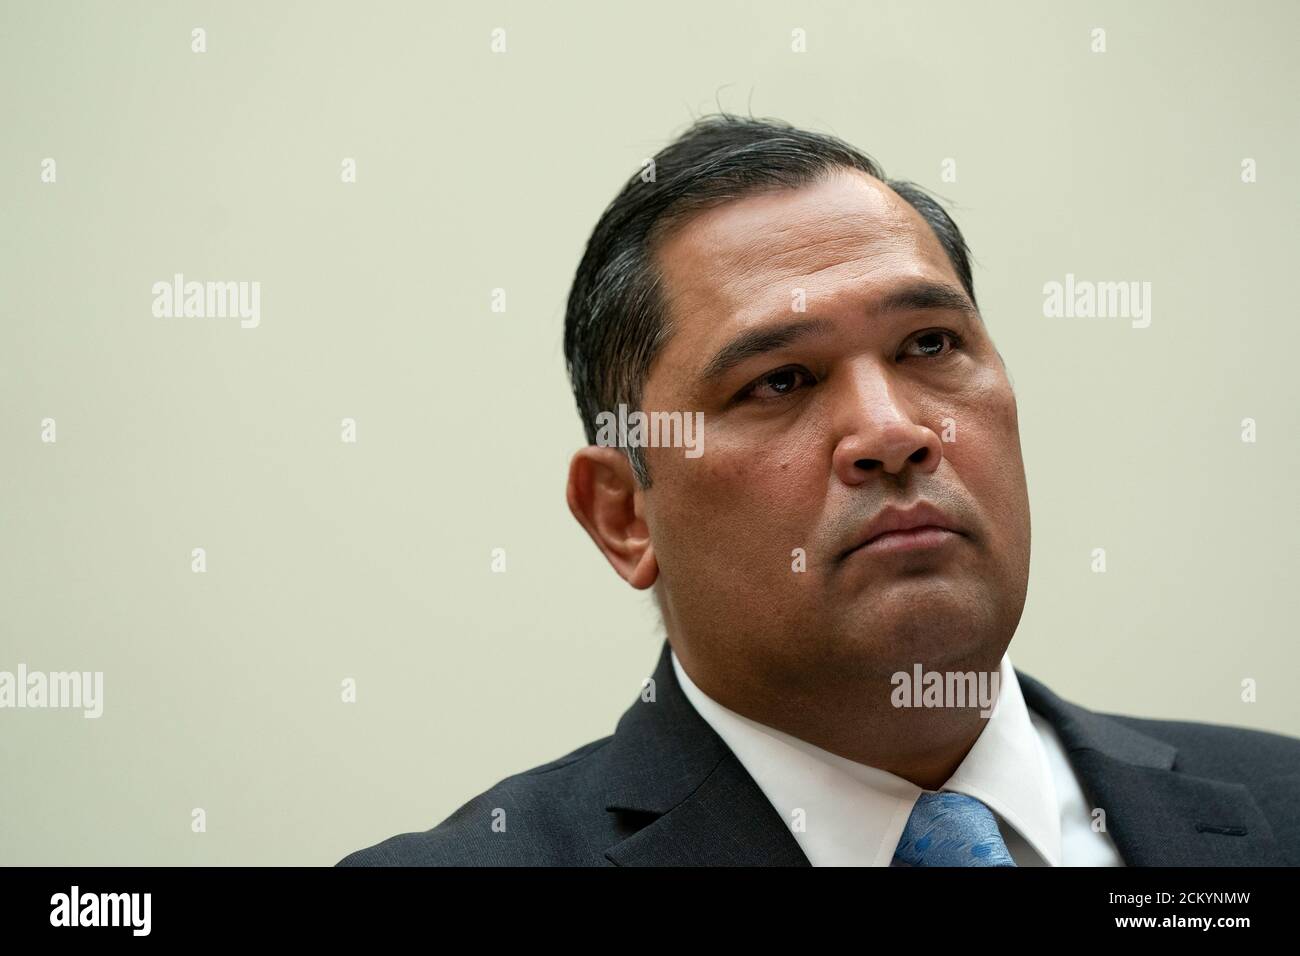 Washington, DC, USA. 16th Sep, 2020. Brian Bulatao, under secretary of state for management at the U.S. Department of State, listens during a US House Foreign Affairs Committee hearing in Washington, DC, U.S., on Wednesday, Sept. 16, 2020. The hearing is investigating the firing of State Department Inspector General Steve Linick.Credit: Stefani Reynolds/Pool via CNP | usage worldwide Credit: dpa/Alamy Live News Stock Photo